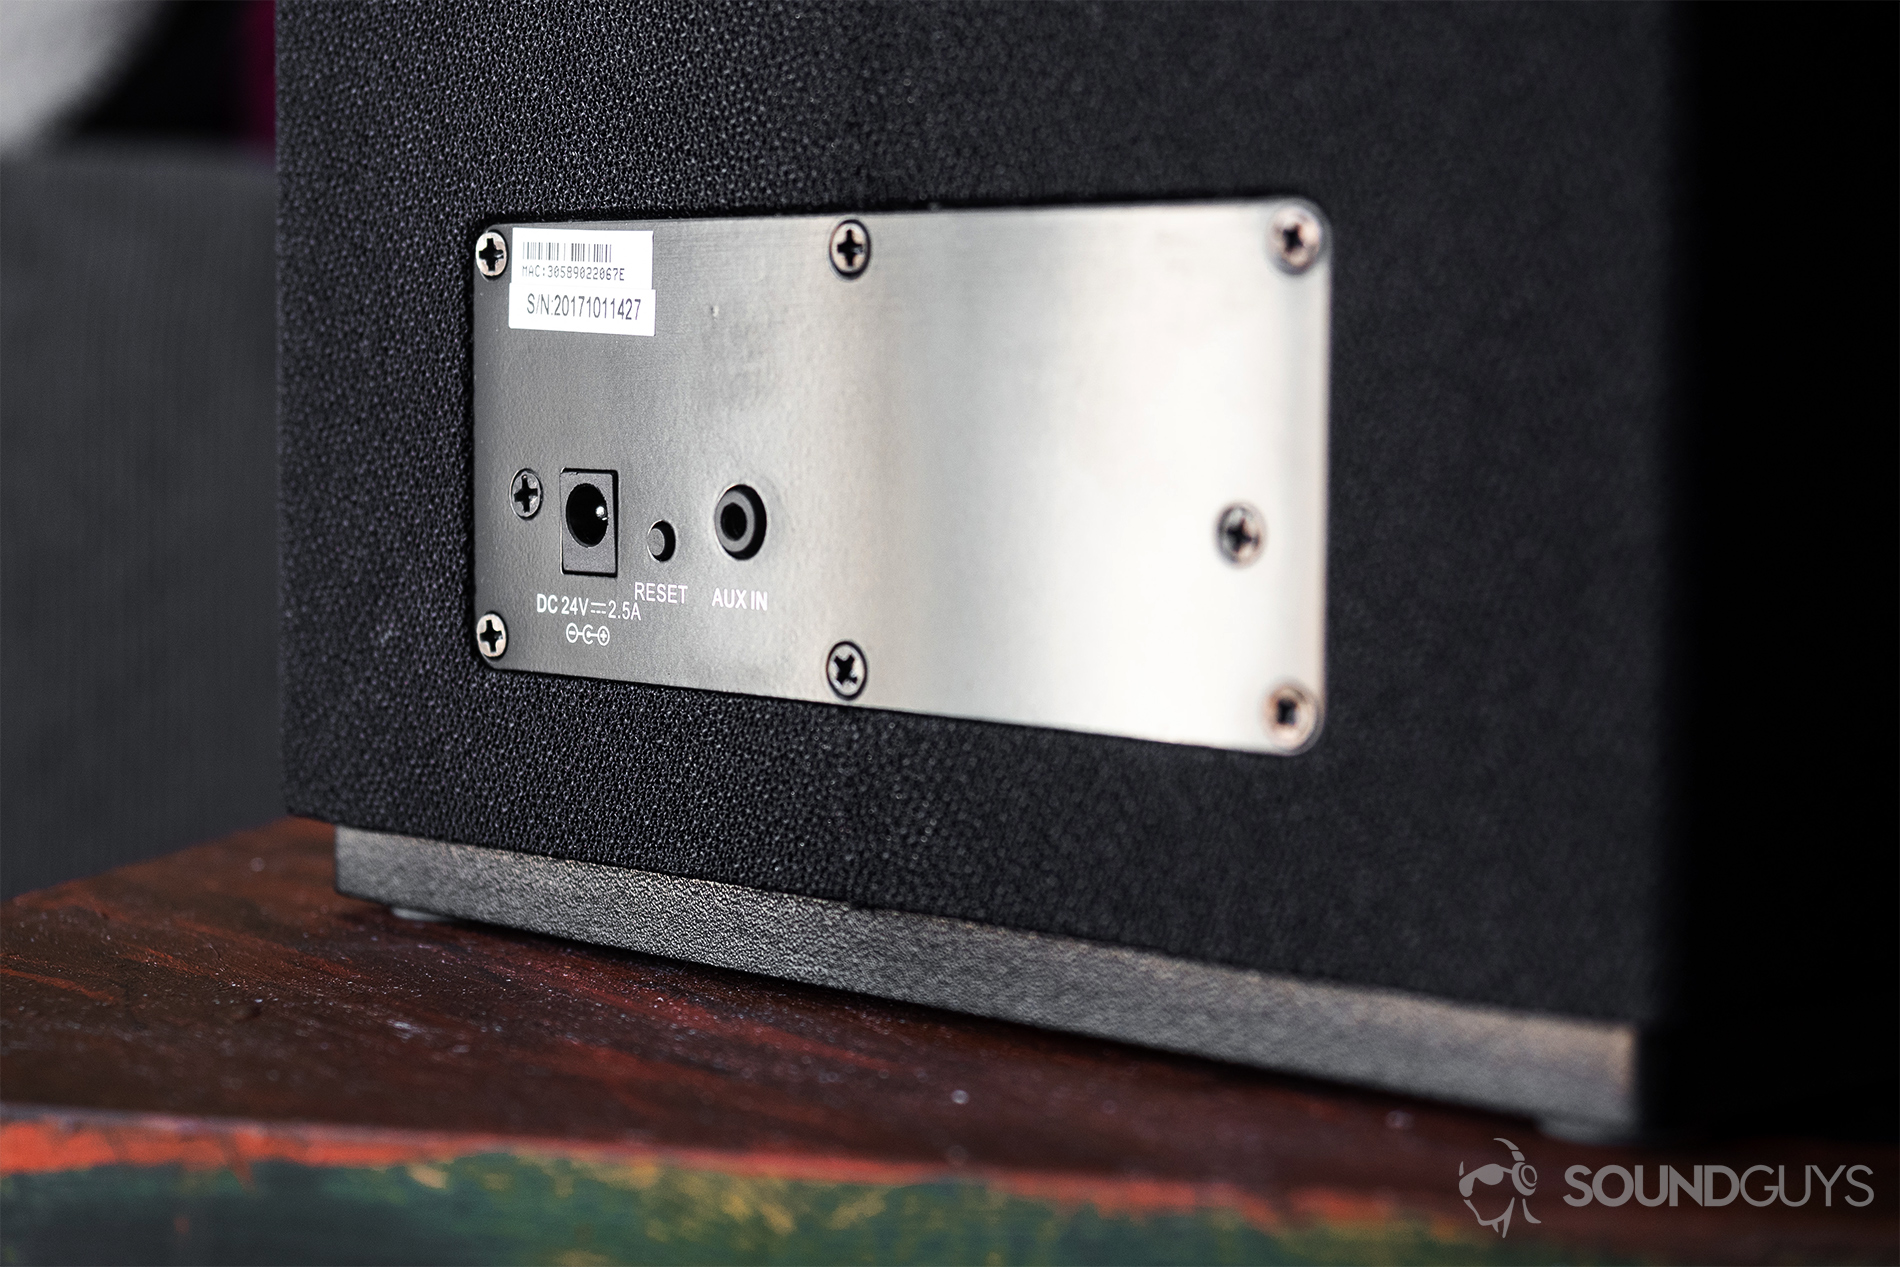 Solis SO-7000 review: The inputs on the back - aux, power, and reset button.